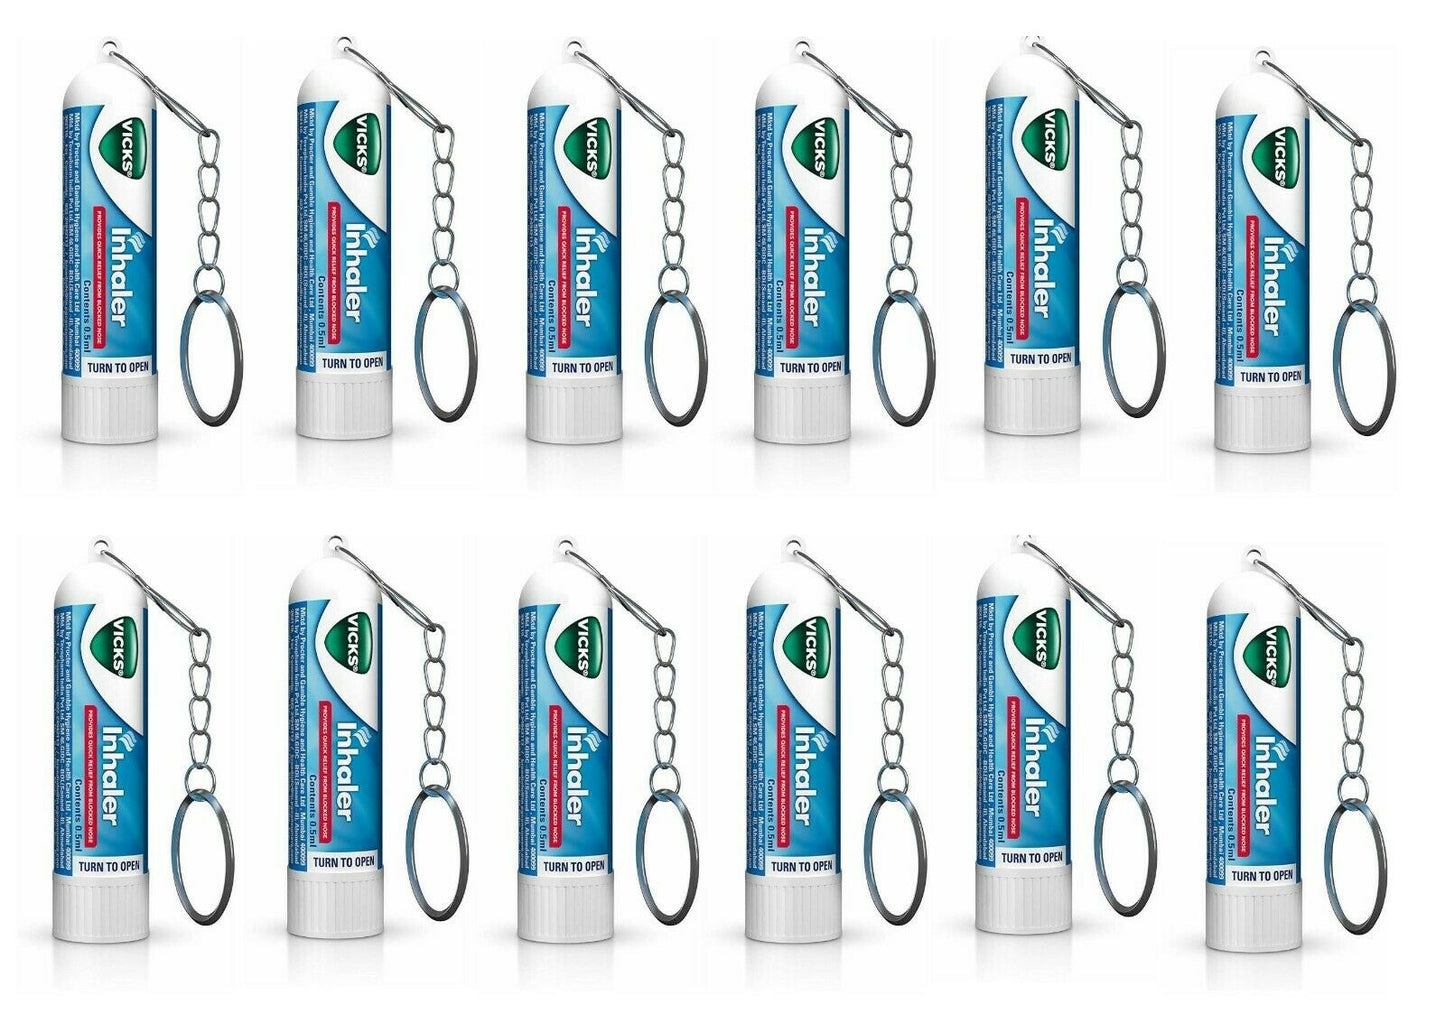 Vicks Inhaler for Fast Relief in Nasal Congestion (PACK of 12 PCS)